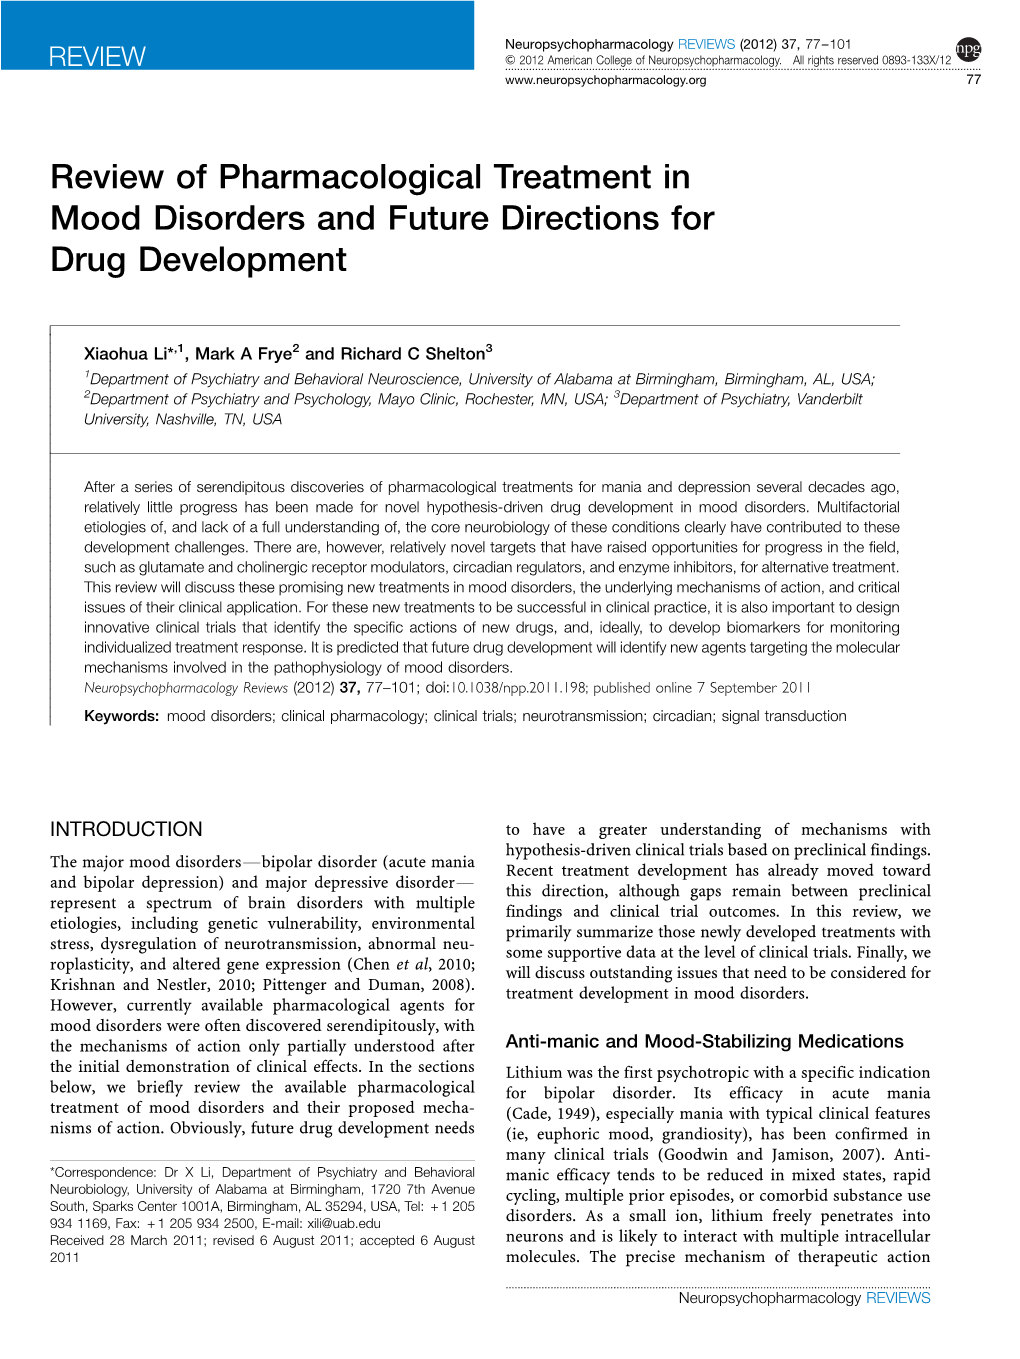 Review of Pharmacological Treatment in Mood Disorders and Future Directions for Drug Development